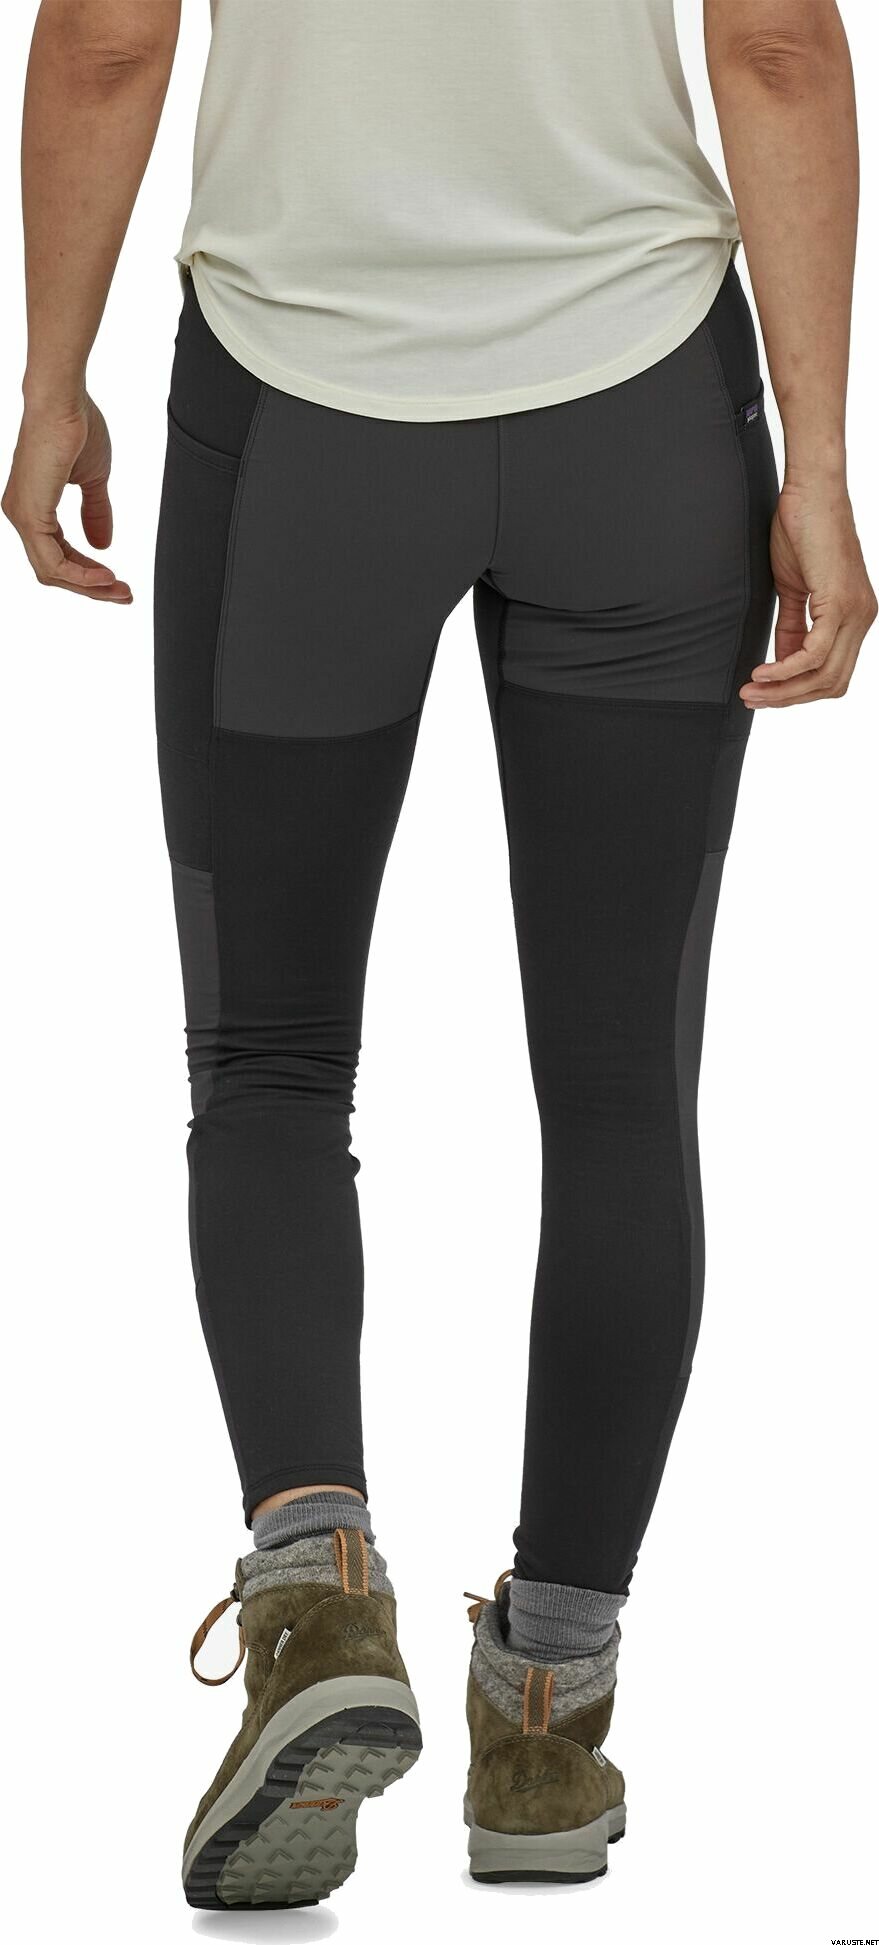 Pack Out Hike Tights - Women's (Fall 2022)